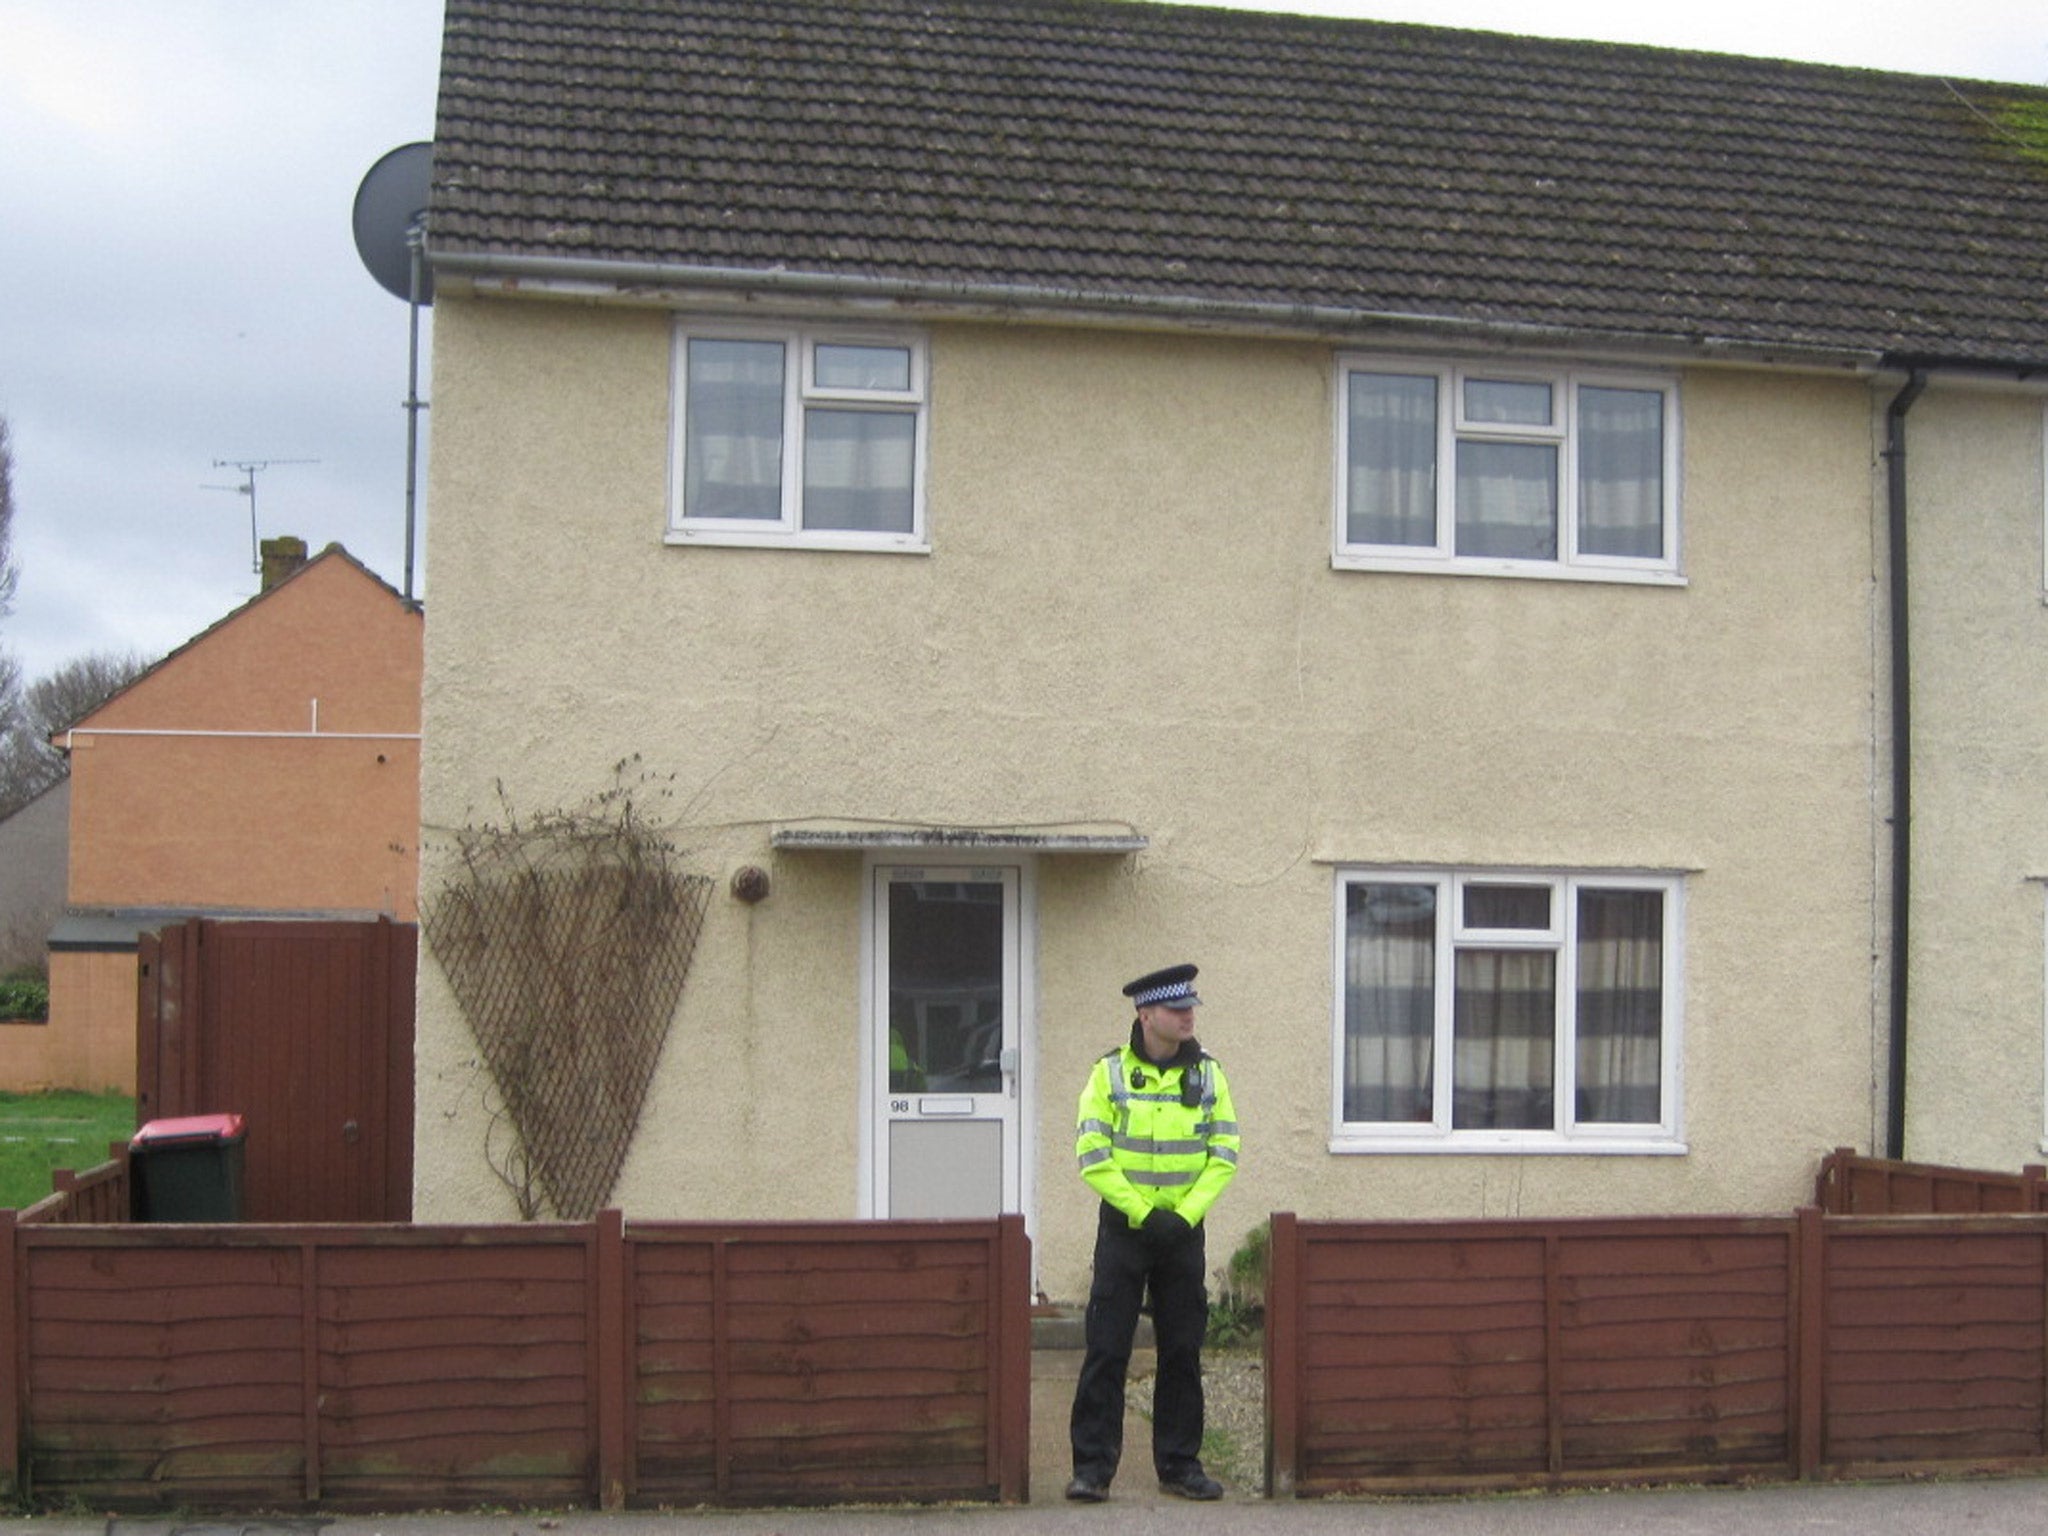 A policeman guards the house in Crawley